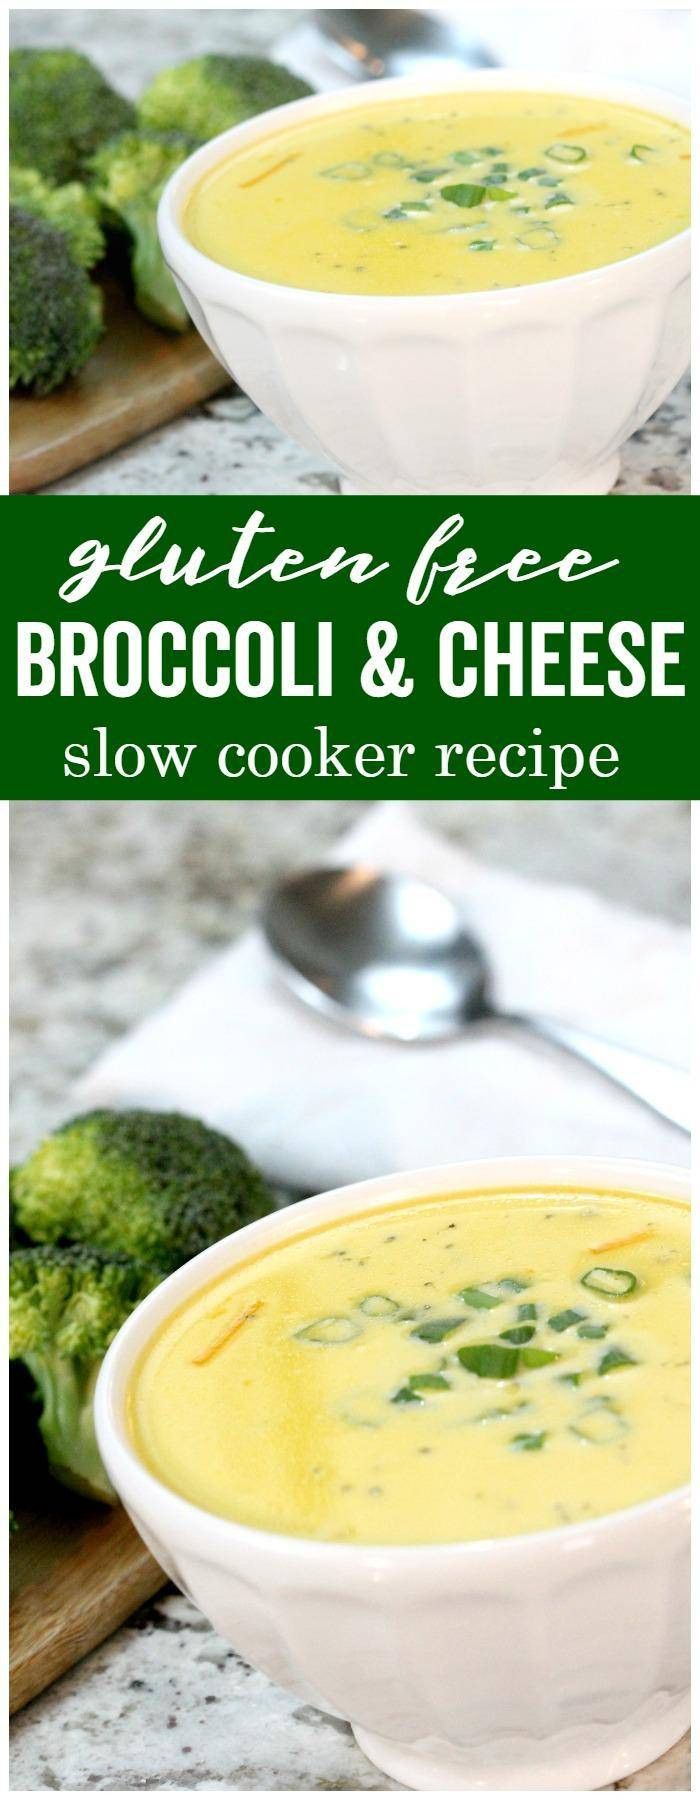 Dairy Free Slow Cooker Recipes
 Slow Cooker Broccoli & Cheese Soup Recipe Gluten Free